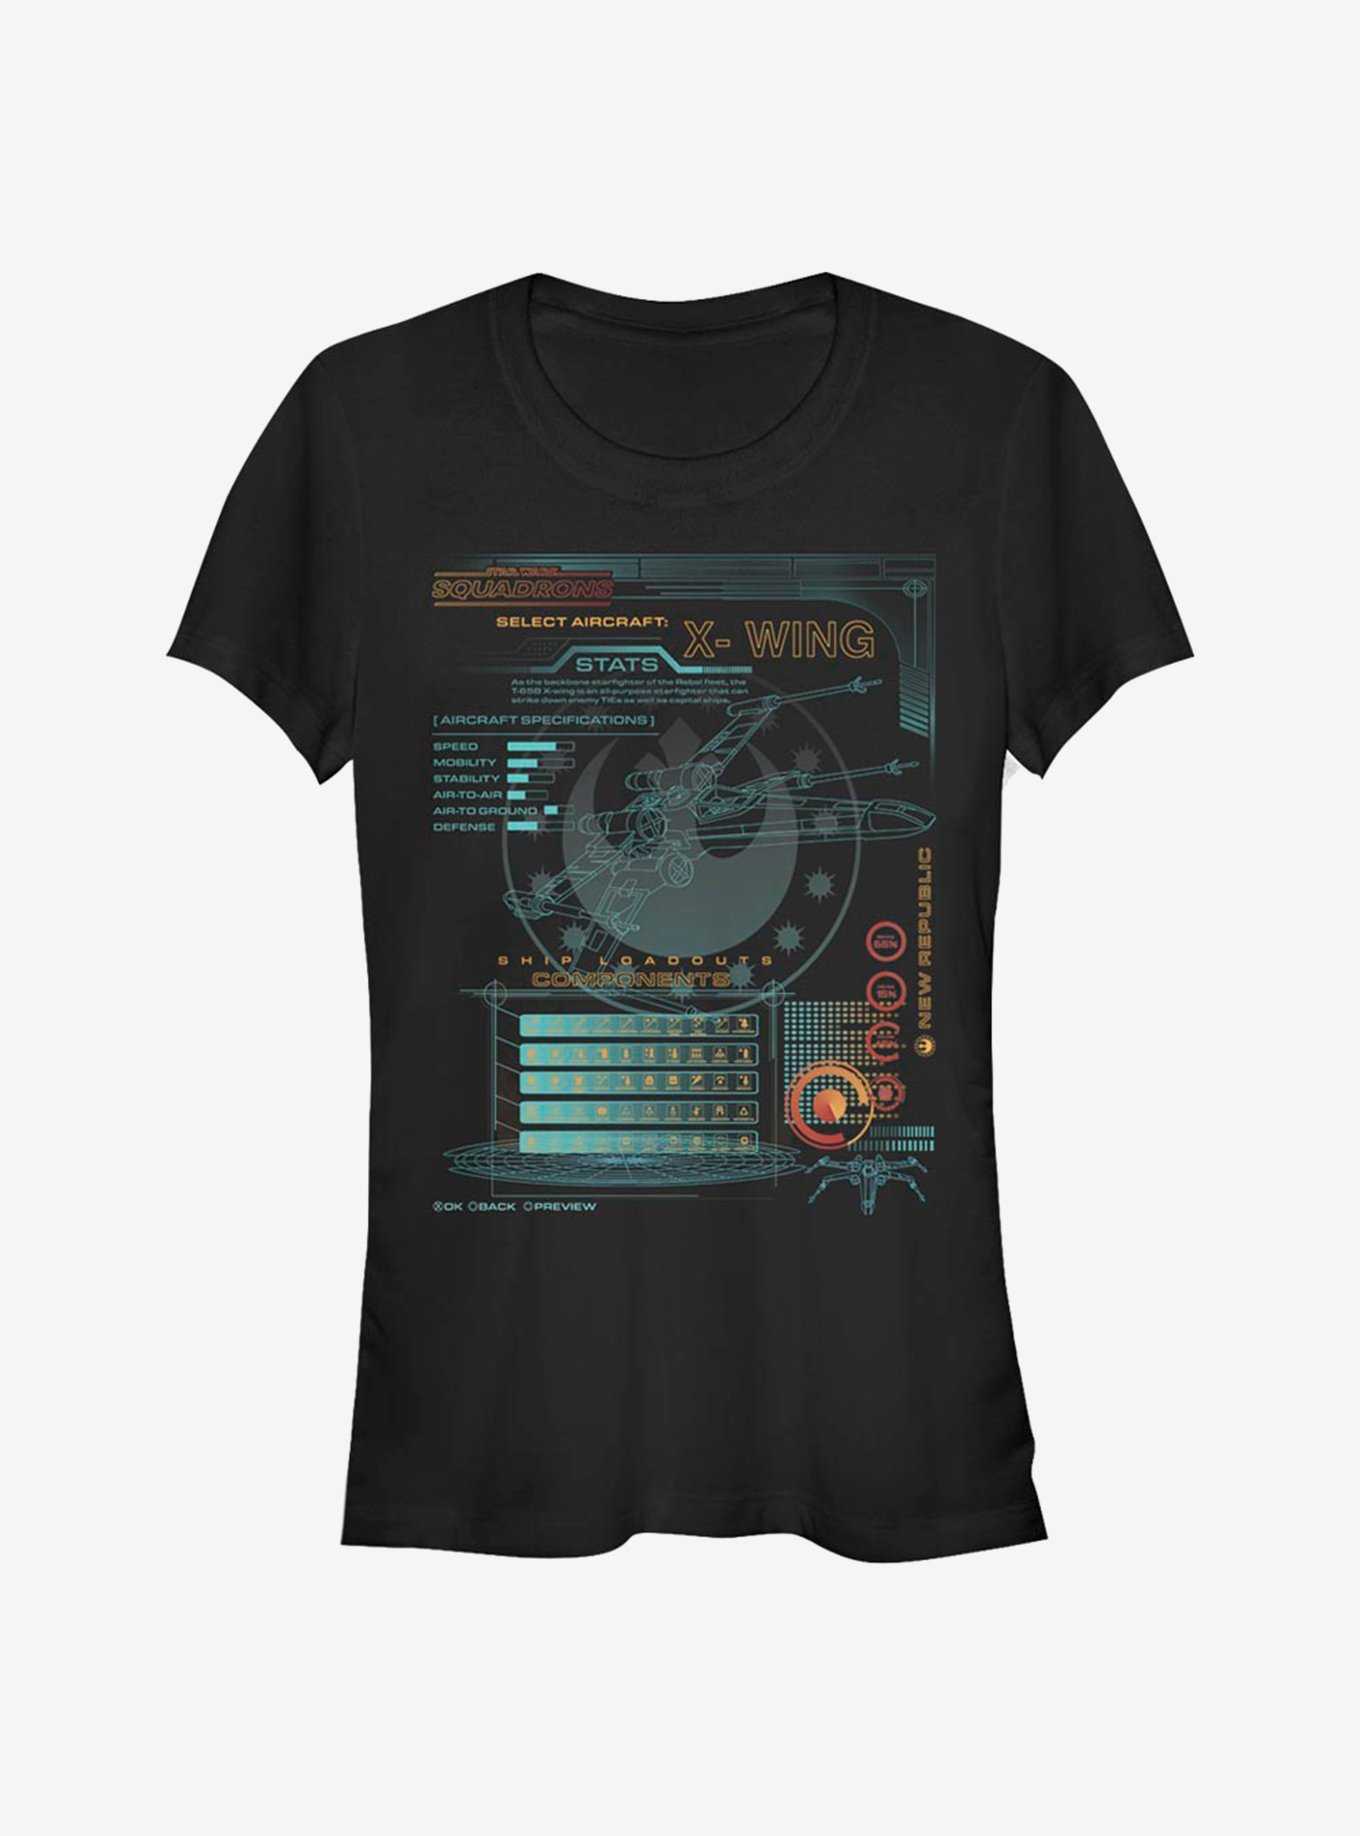 Star Wars X-Wing Game Components Girls T-Shirt, , hi-res